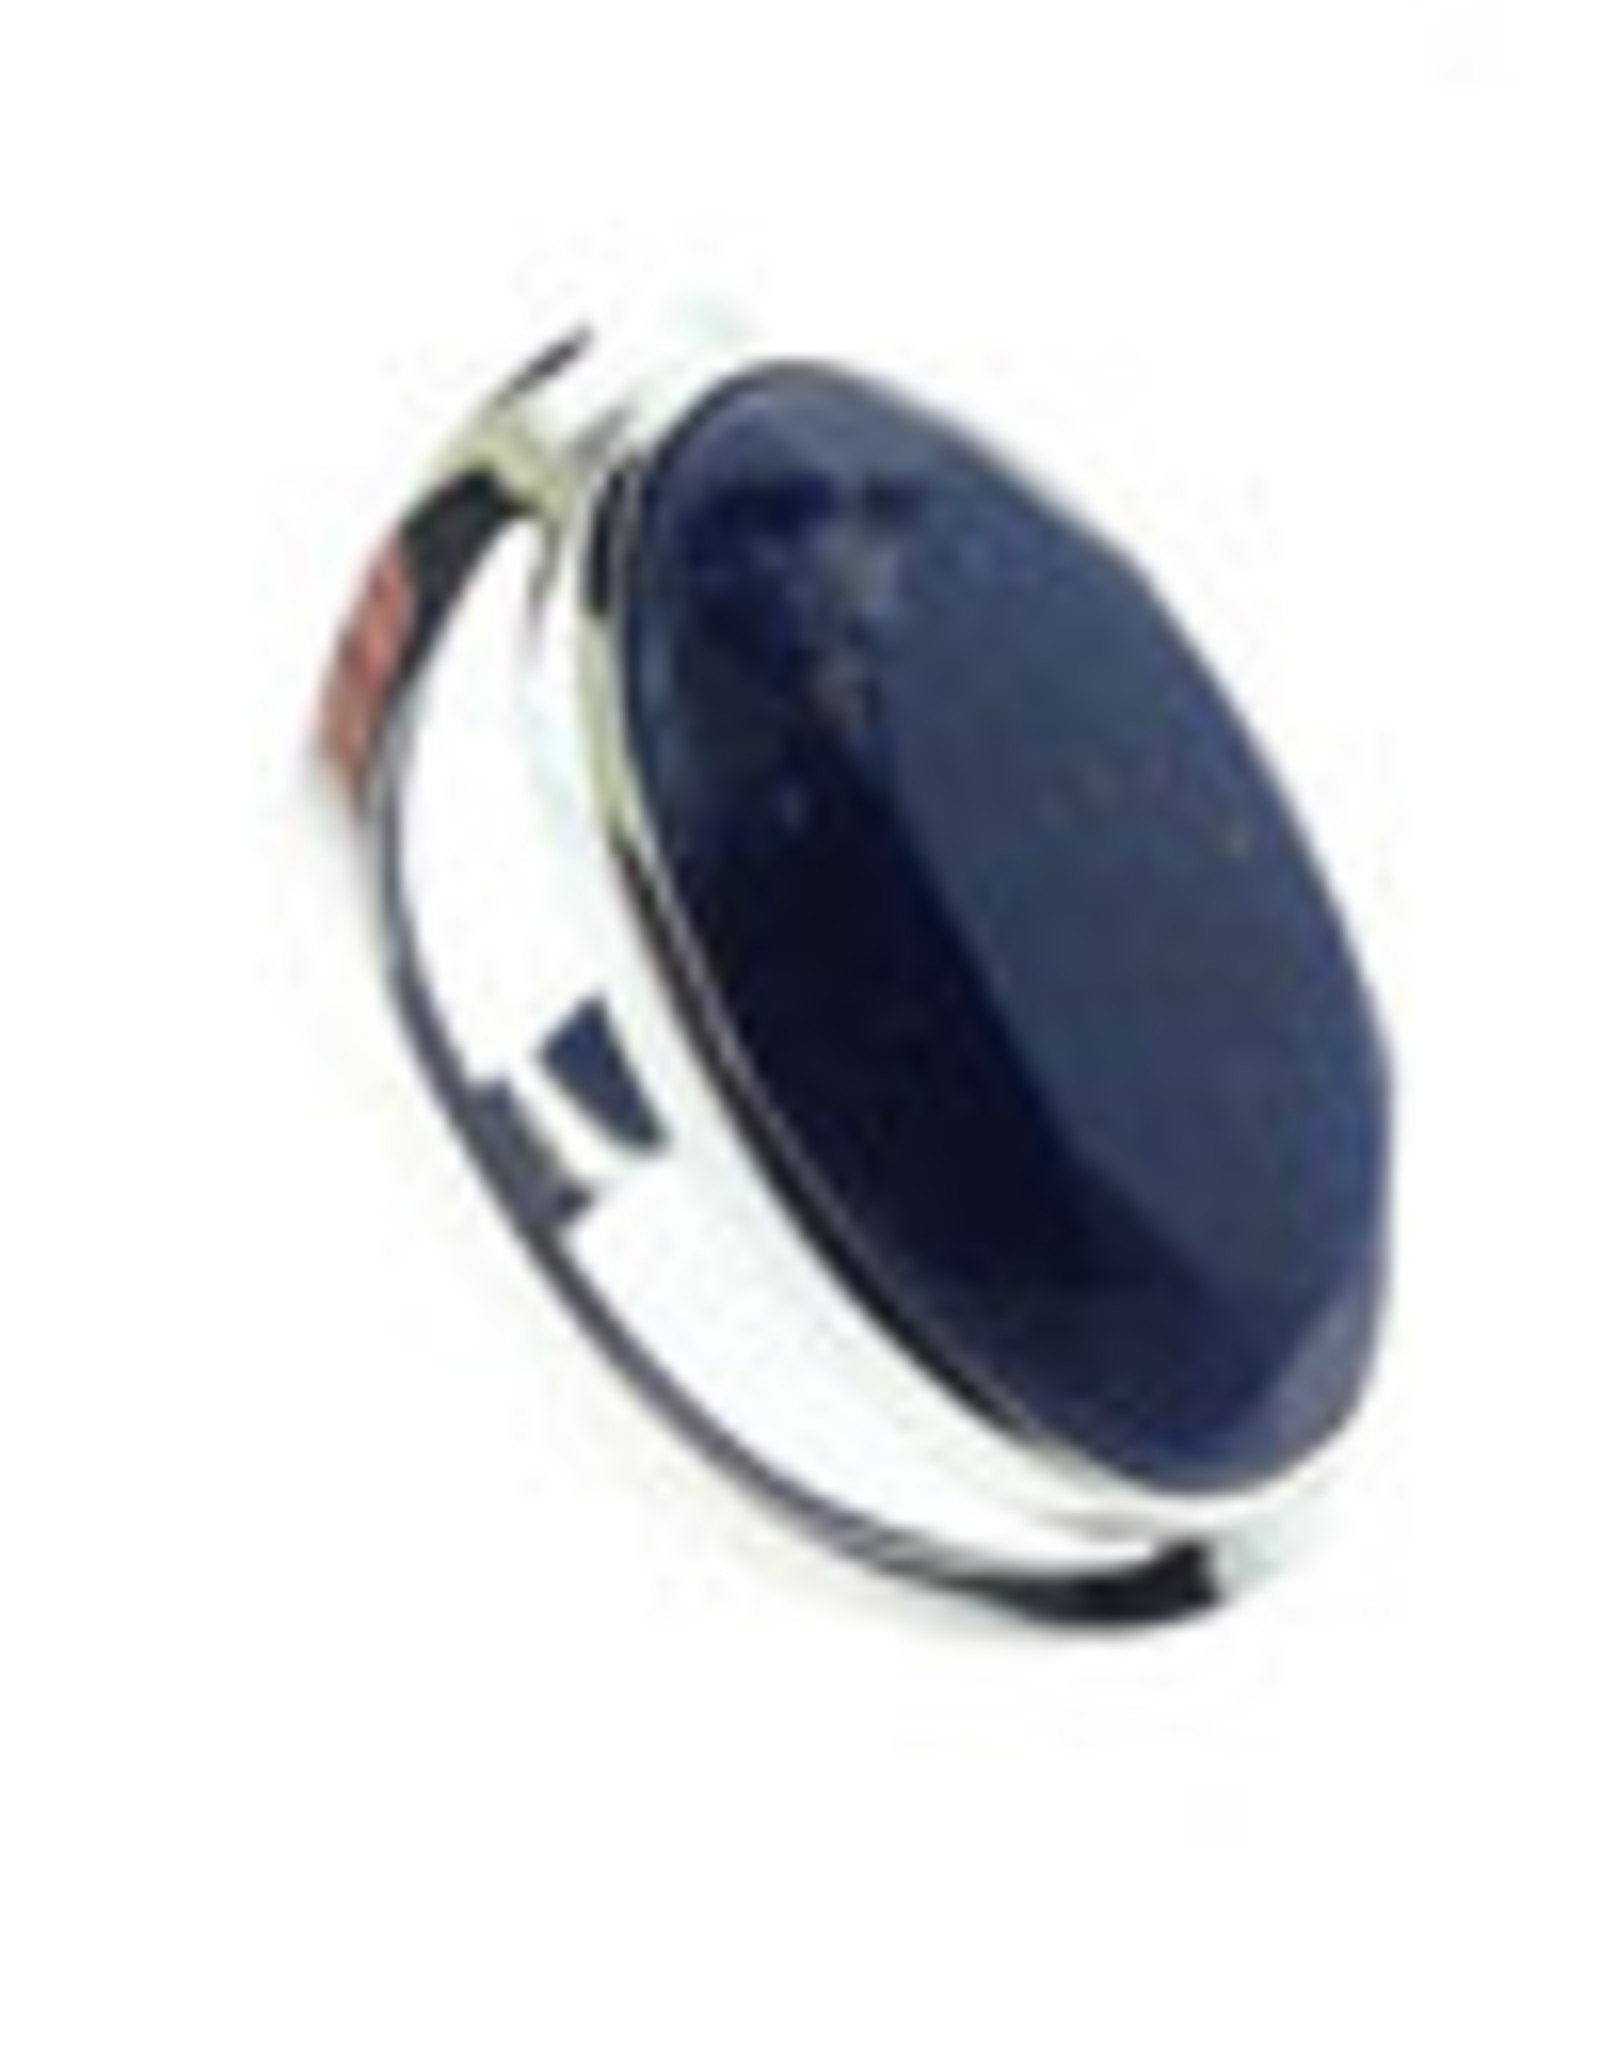 Faceted Sodalite Ring